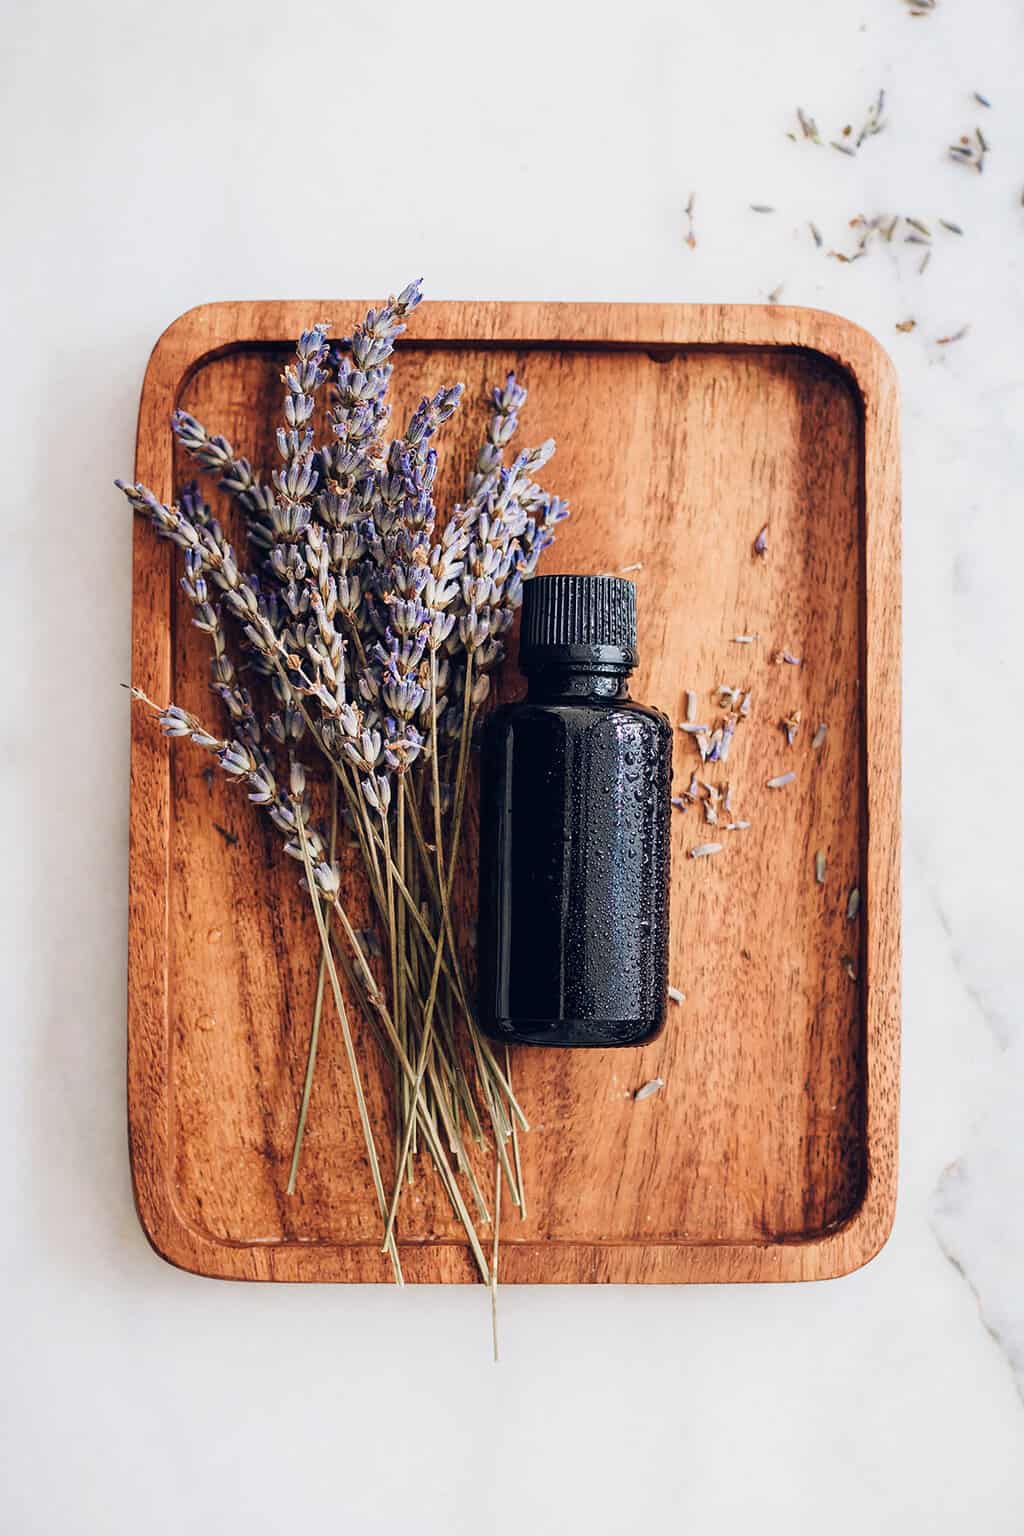 6 Reasons To Add Lavender Oil To Your Beauty Routine